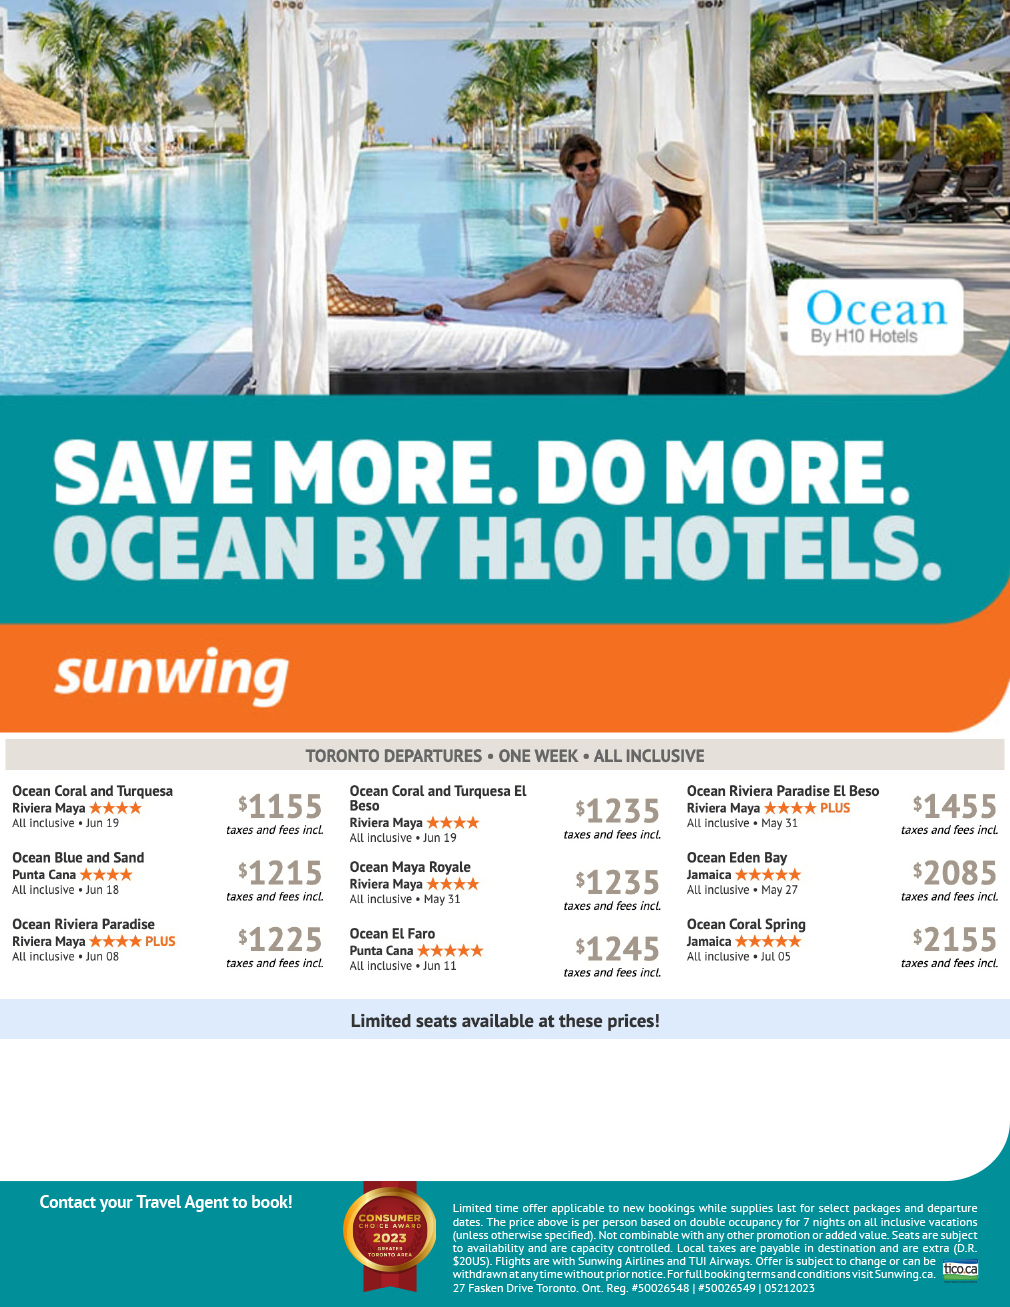 Save More. Do More. Ocean By H10 Hotels